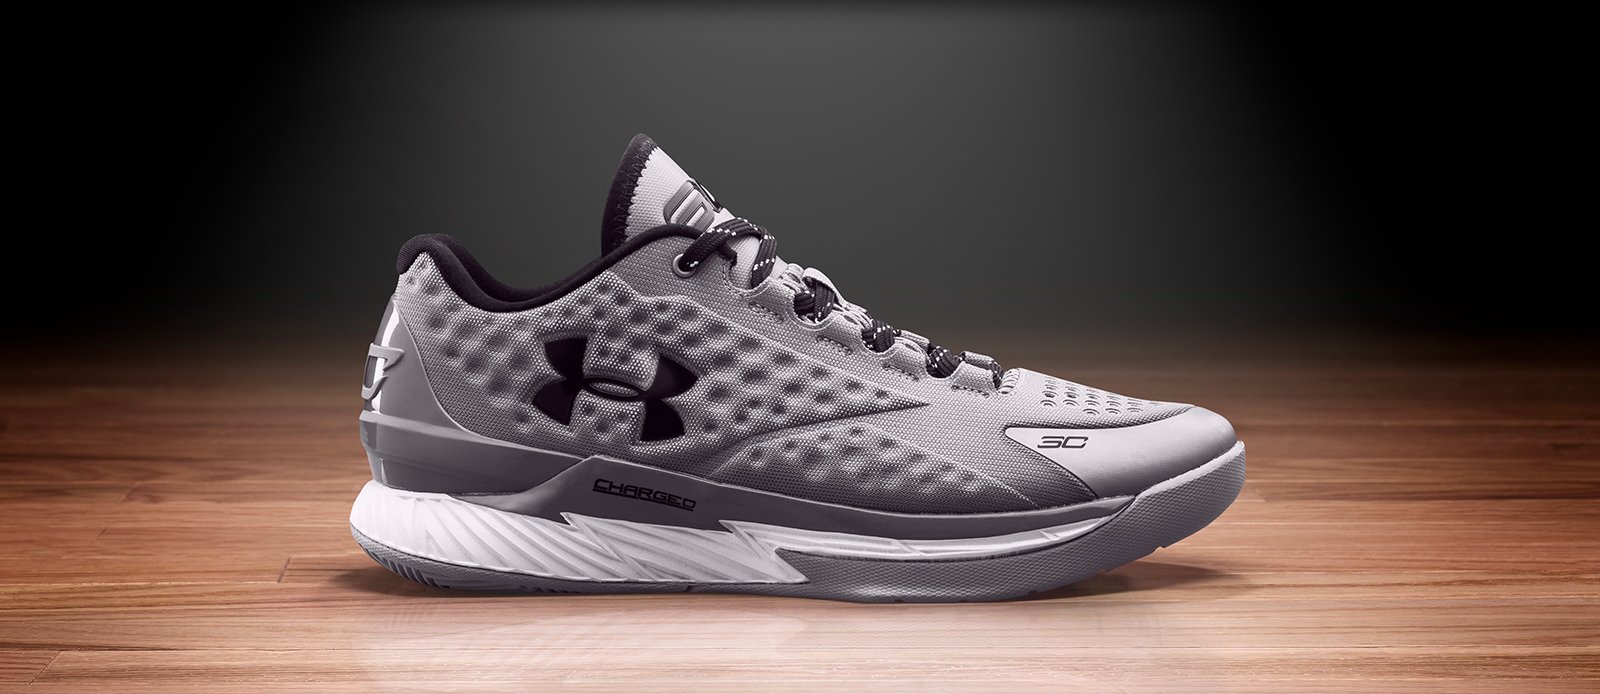 under armour curry 1 silver kids